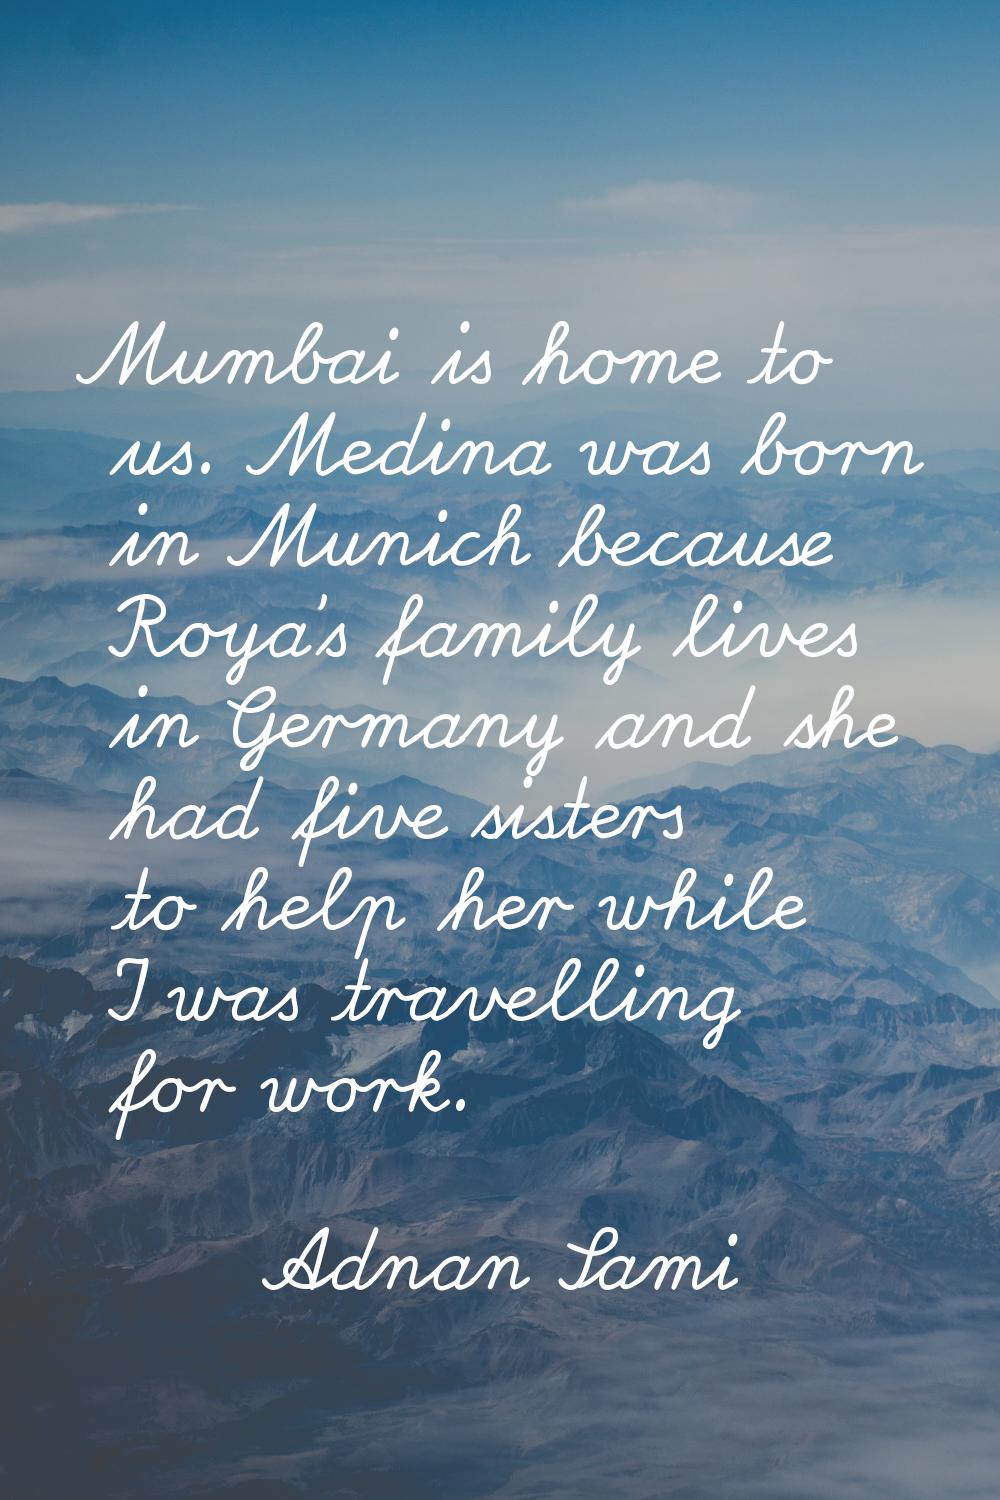 Mumbai is home to us. Medina was born in Munich because Roya's family lives in Germany and she had 